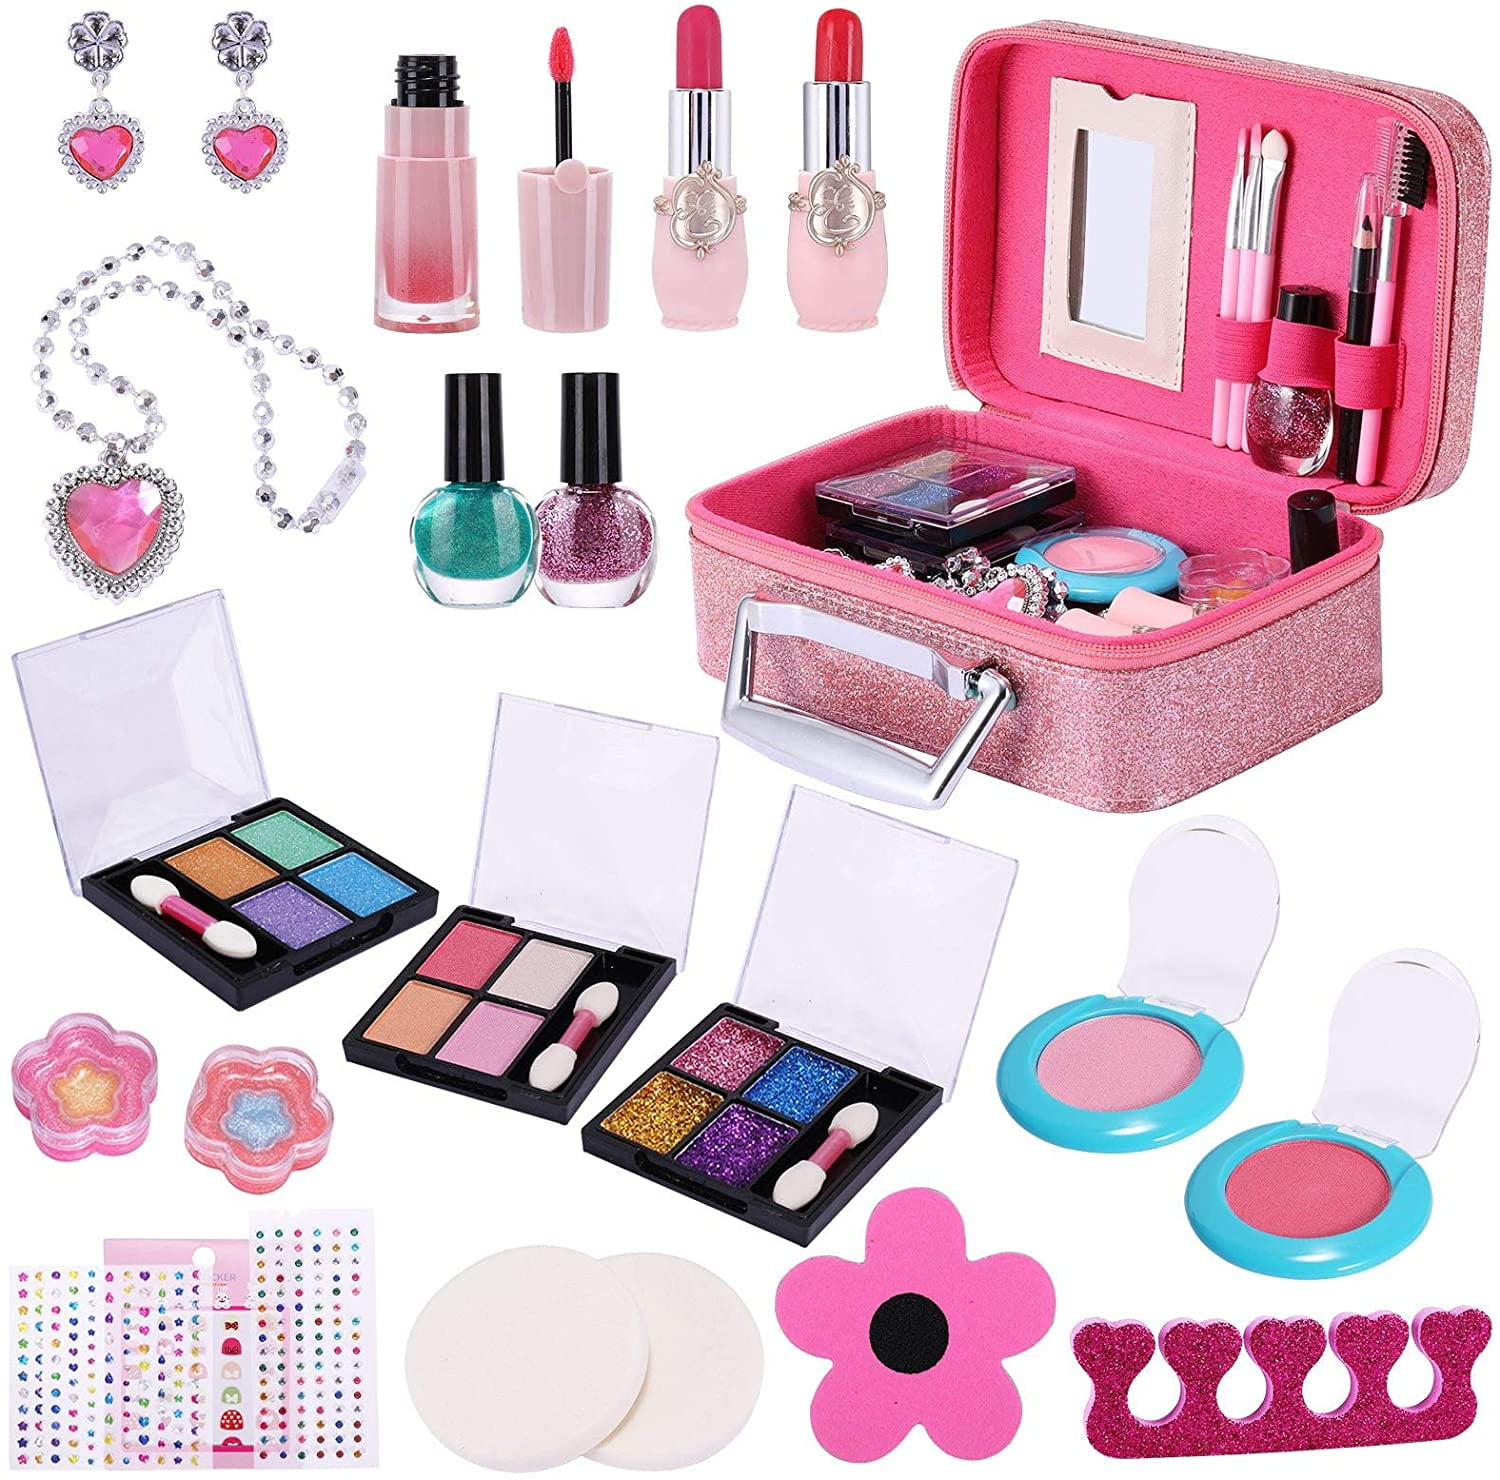 29pcs Buyger 5 in 1 Girls Make Up Set Pretend Play Toys Dressing Table With Hair Dryer in Carry Case